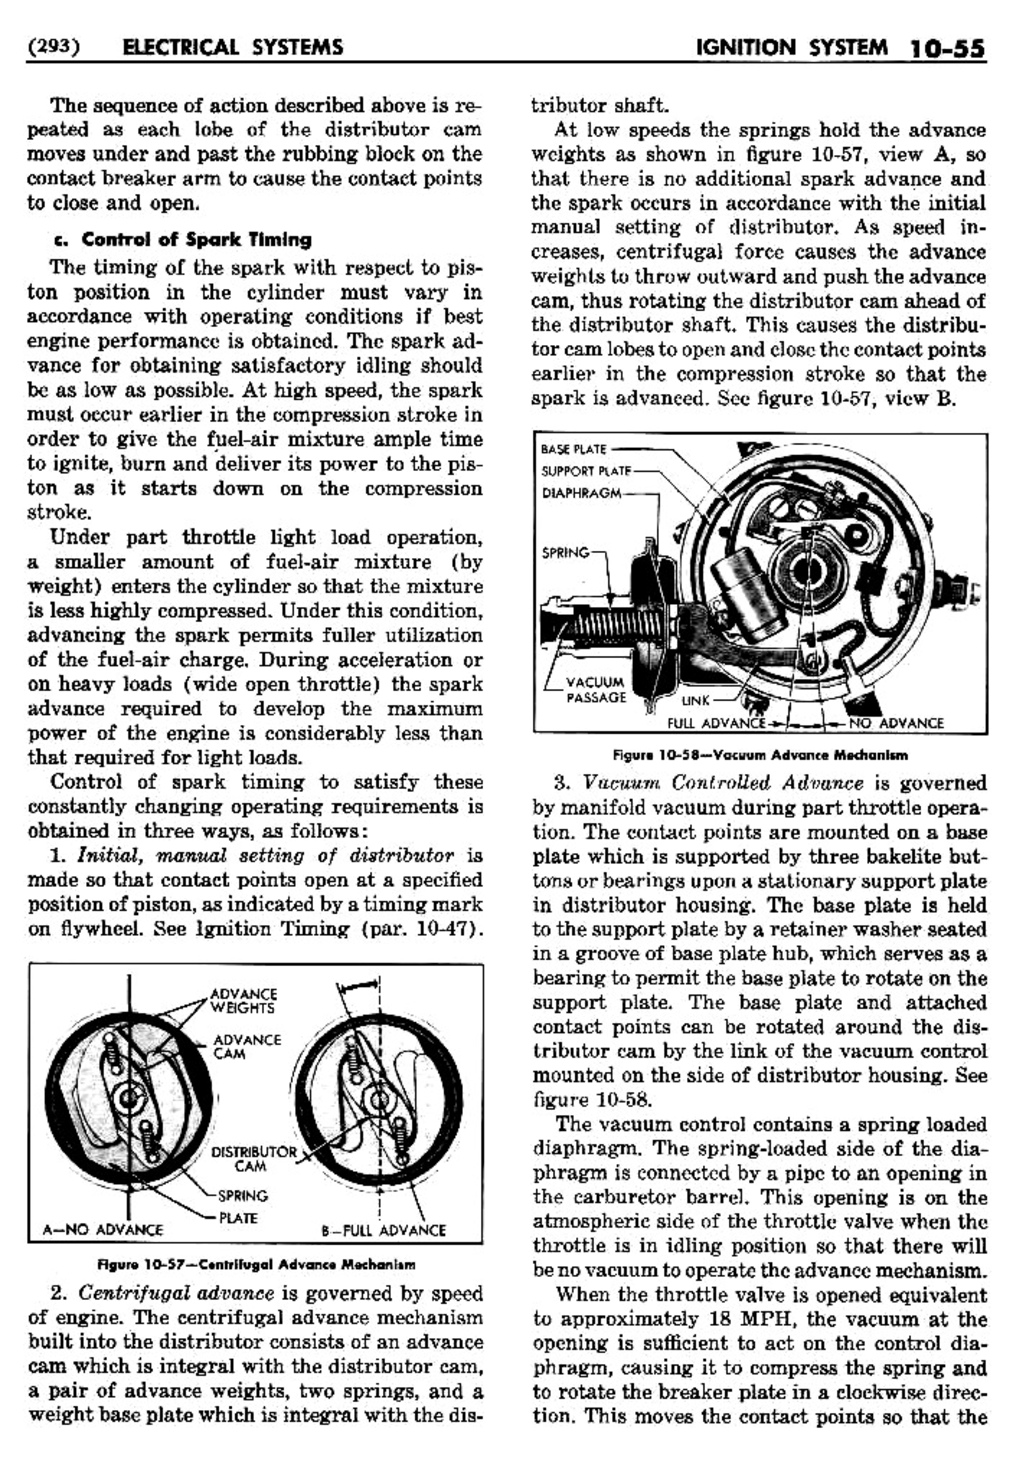 n_11 1950 Buick Shop Manual - Electrical Systems-055-055.jpg